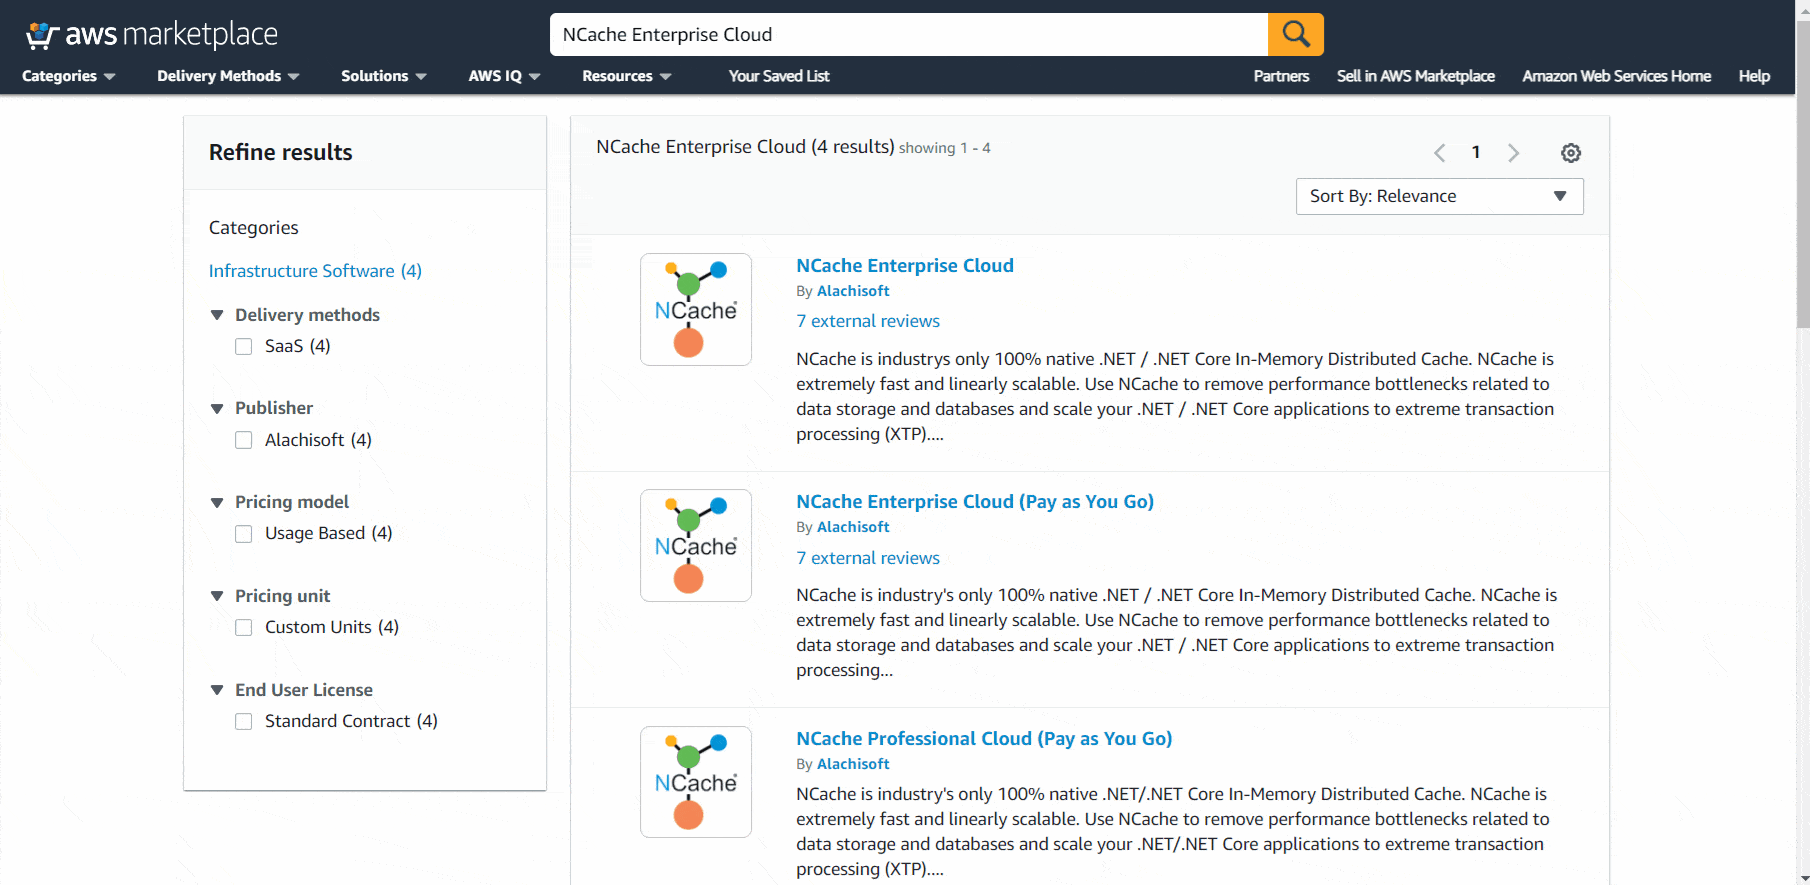 ncache-cloud-subscribe-aws-marketplace